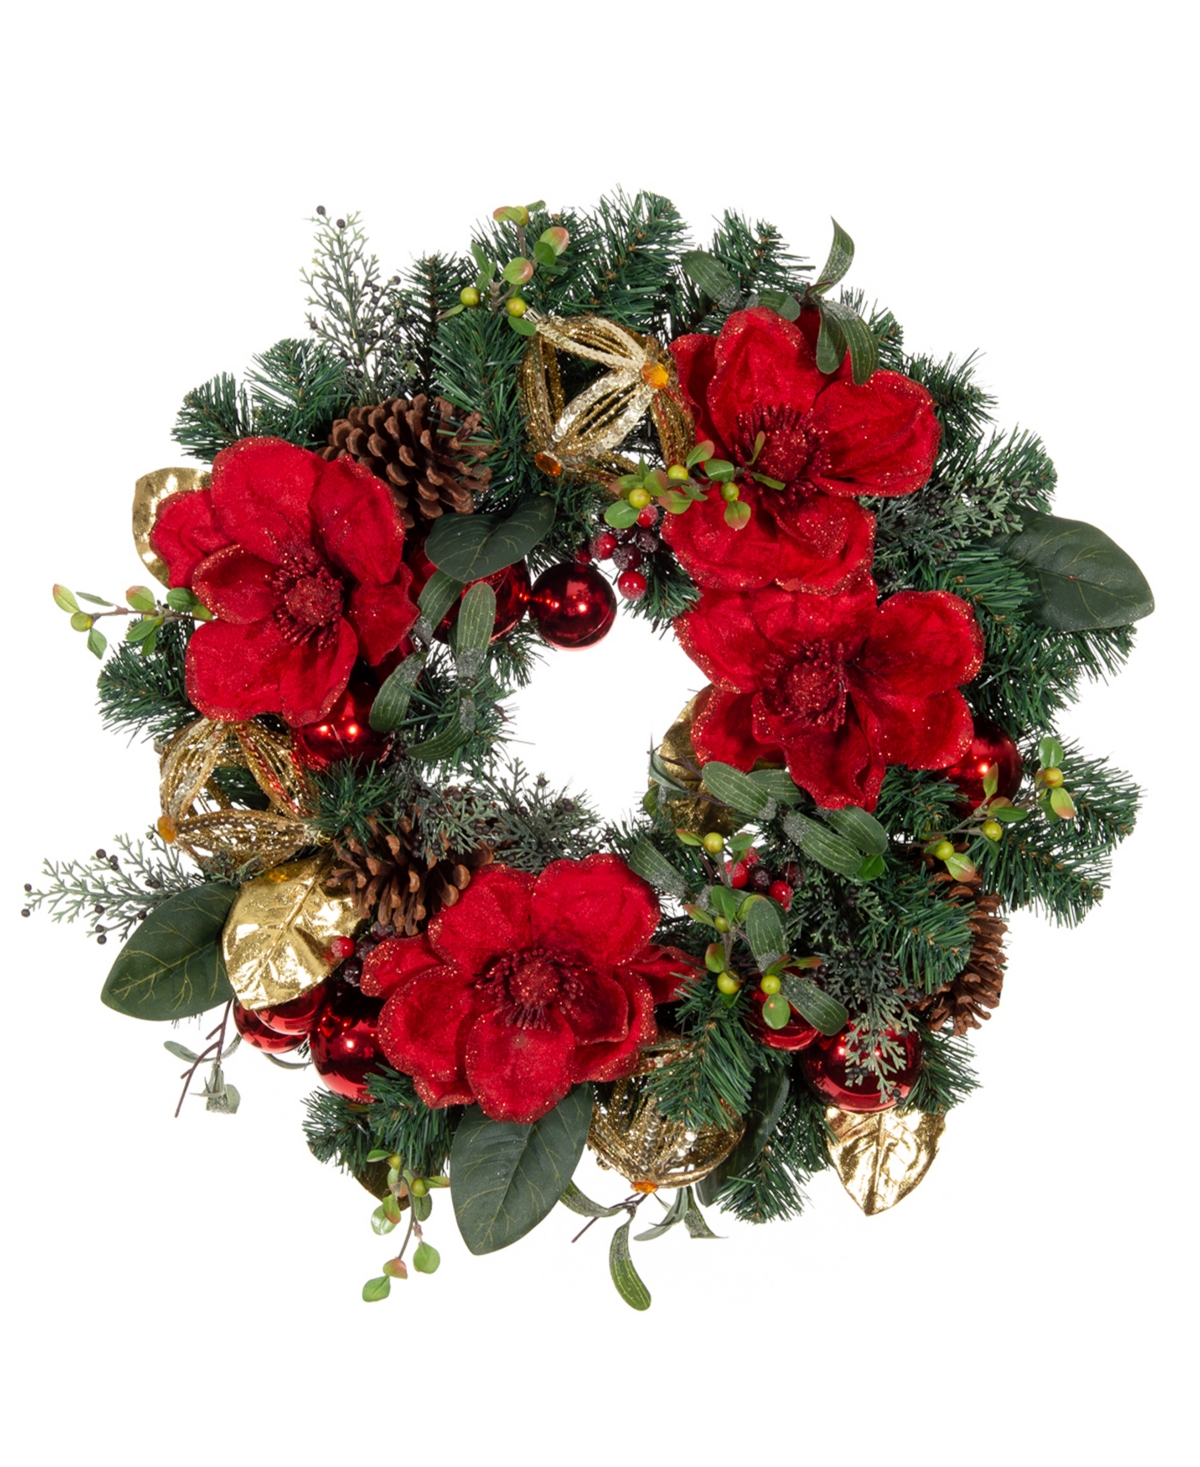 Village Lighting 24" Lighted Christmas Wreath, Red Magnolia In Assorted